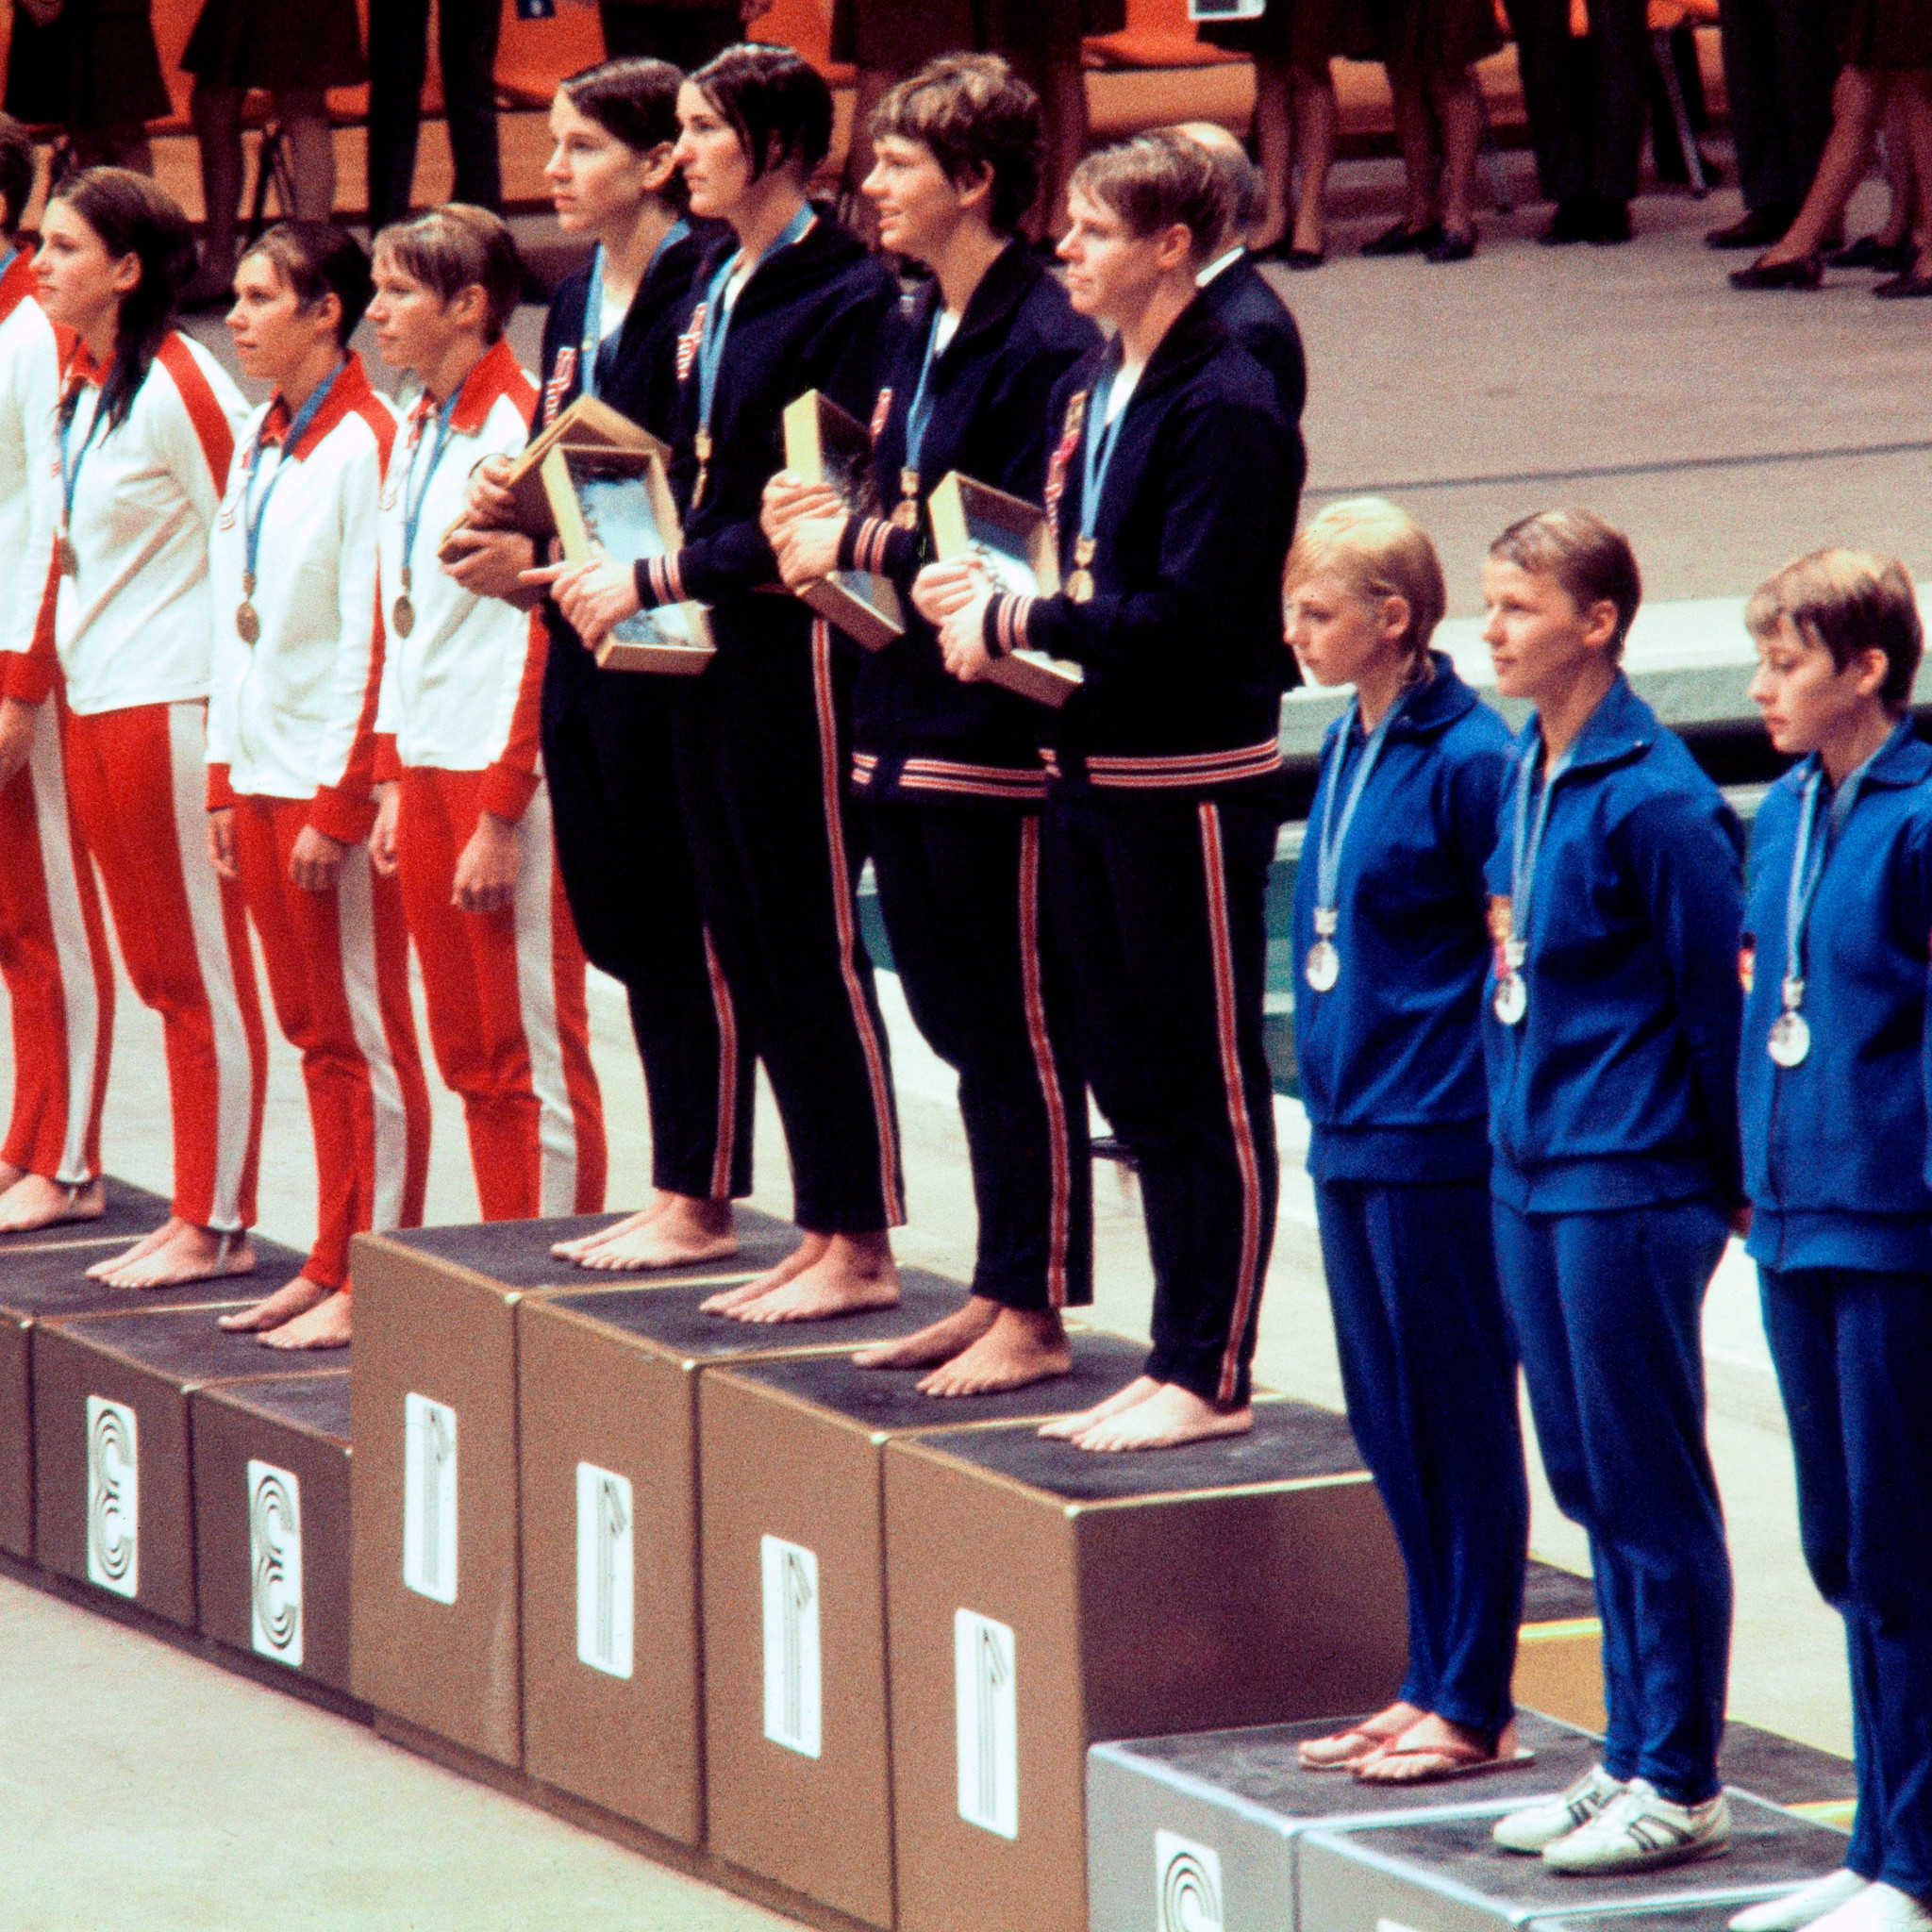 Linda Gustavson was part of the United States team that won the women's 4x100 freestyle relay final at the Olympics in Mexico in 1968 ©Getty Images